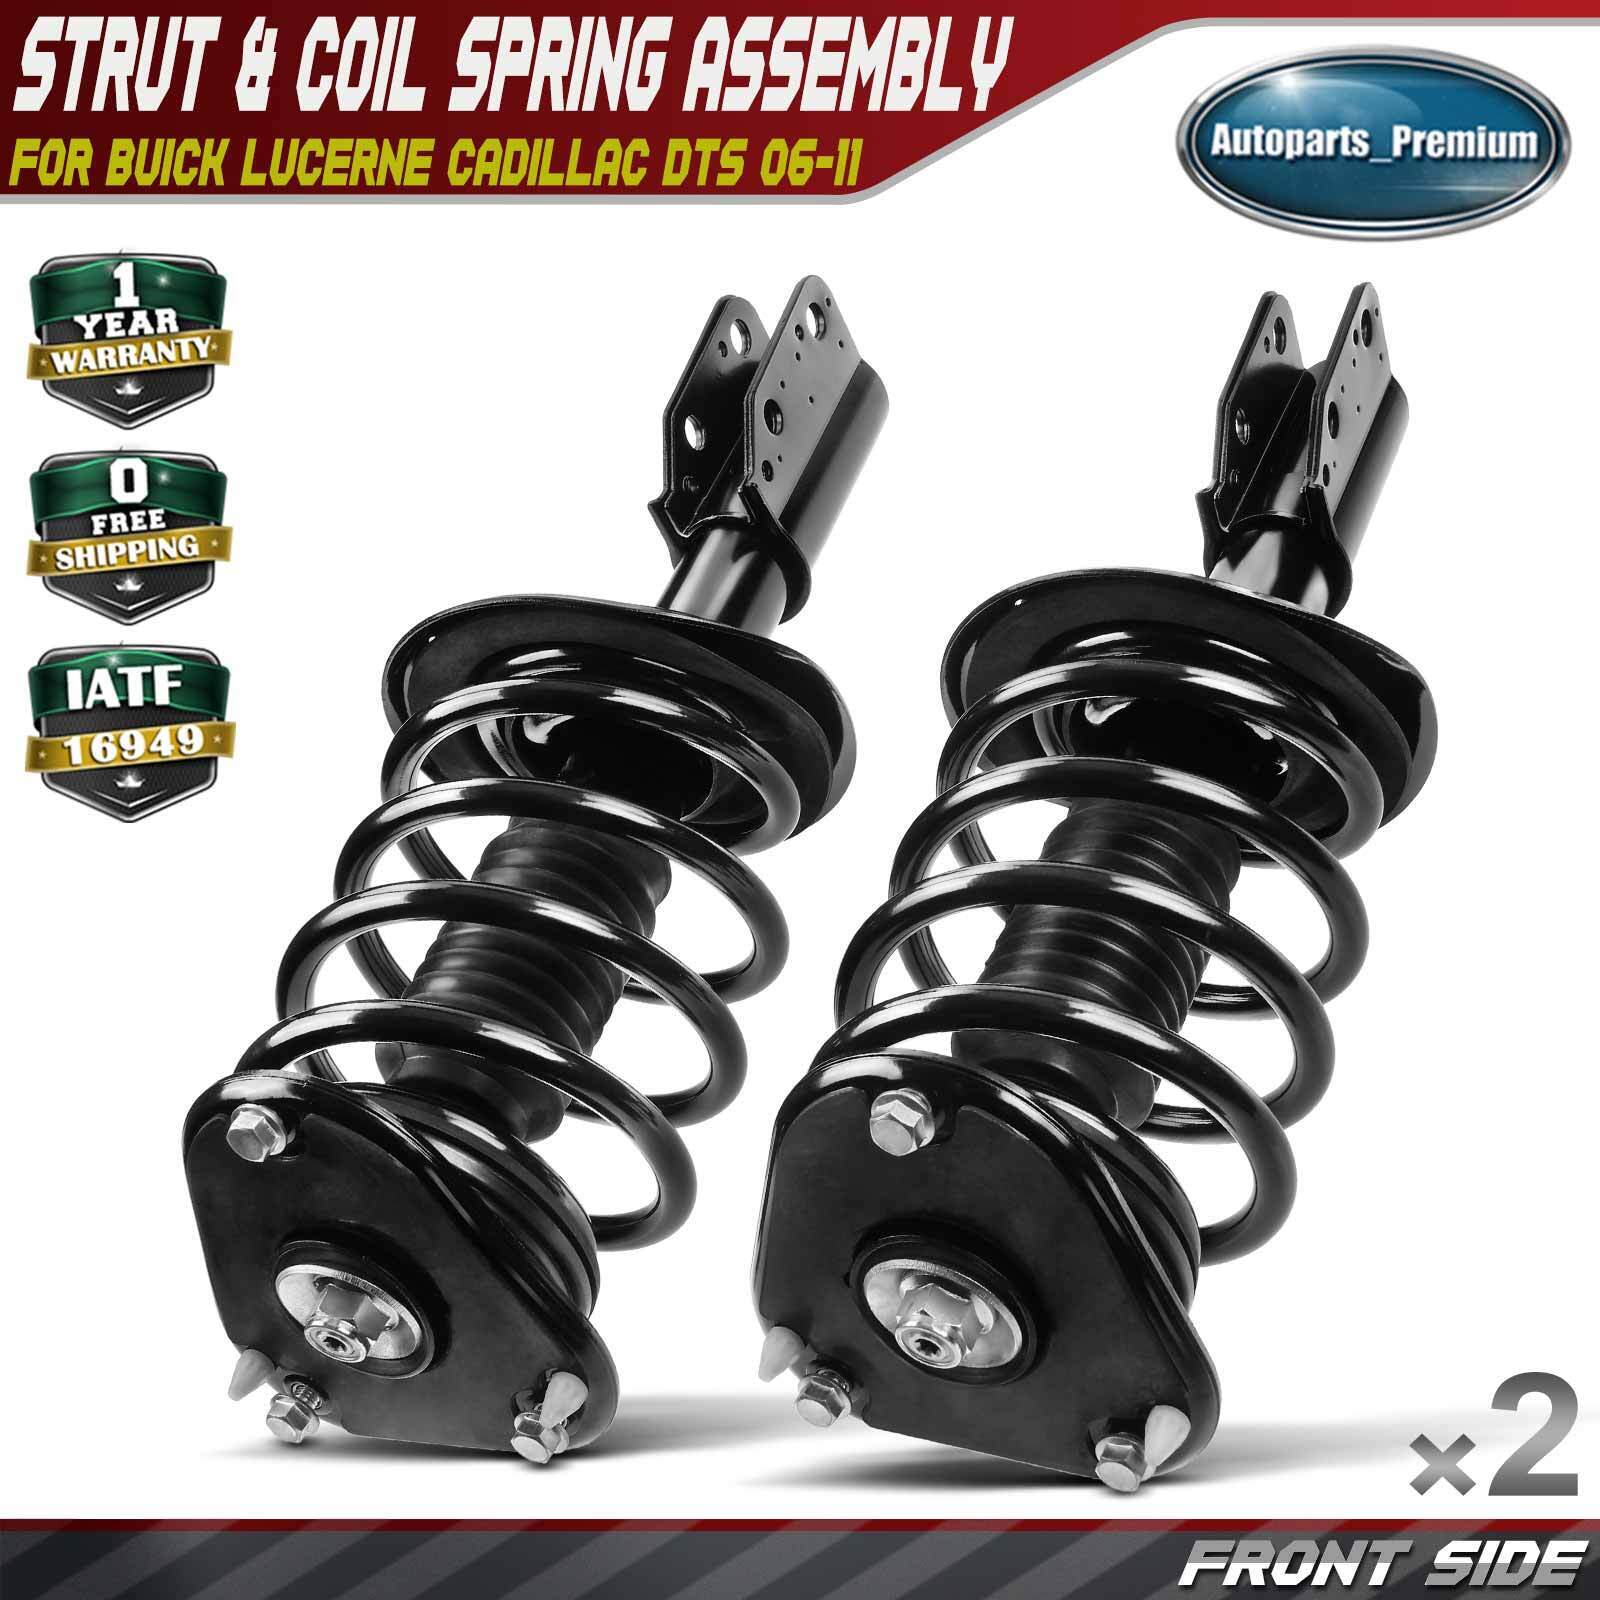 2x Front Complete Strut & Coil Spring Assembly for Buick Lucerne Cadillac DTS